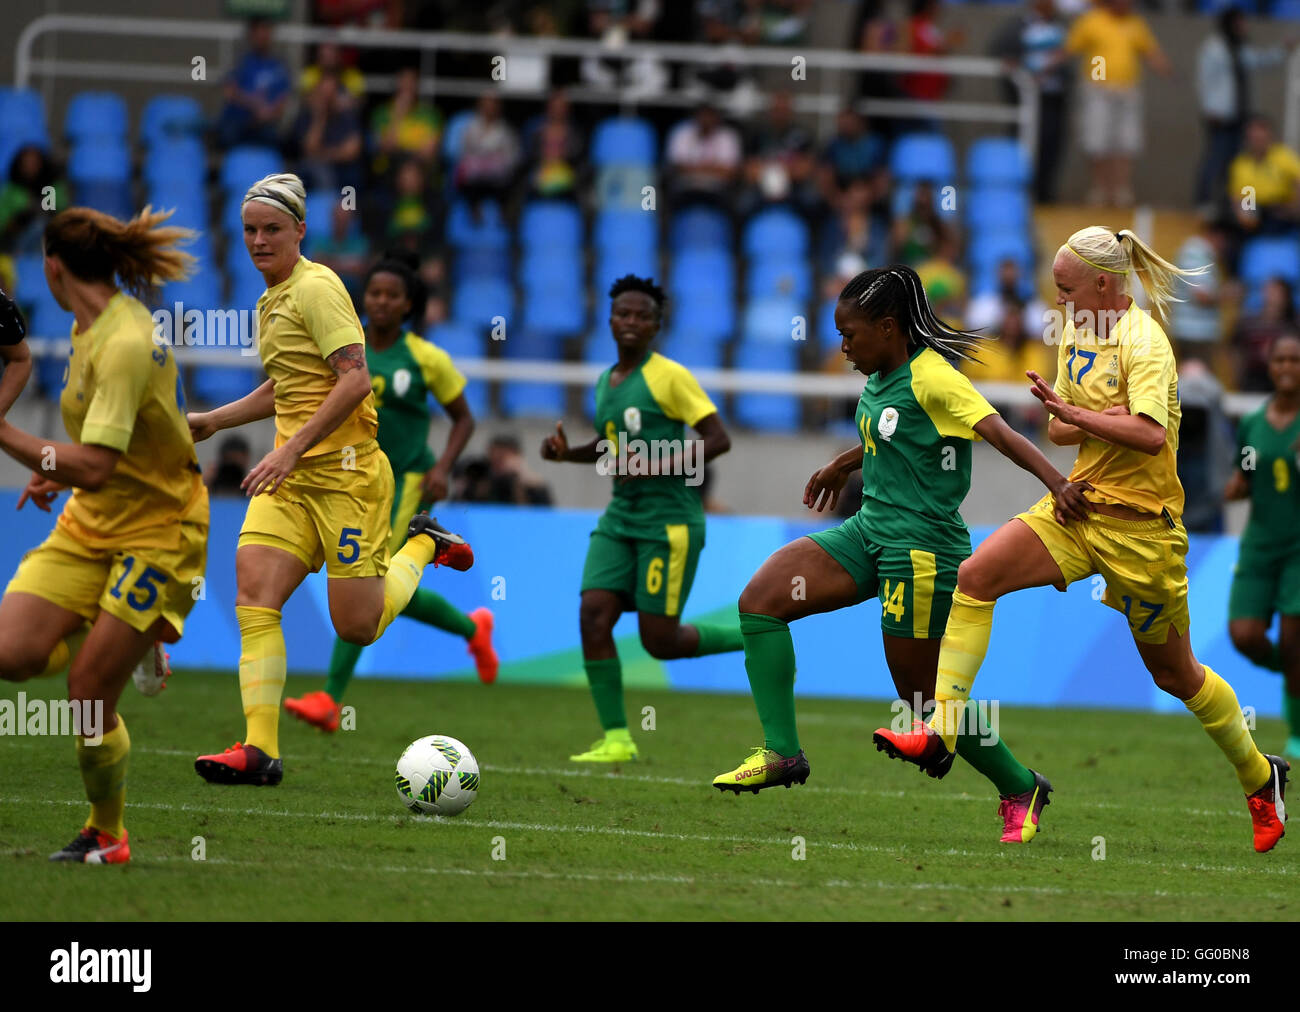 Rio De Janeiro, Brazil. 3rd Aug, 2016. Mollo Sanah (2st R) of South Africa competes during the opening match of the women's Olympic football competitions between South Africa and Sweden at the Olympic Stadium in Rio de Janeiro, Brazil, Aug. 3, 2016. Sweden won 1-0. © Yan Yan/Xinhua/Alamy Live News Stock Photo